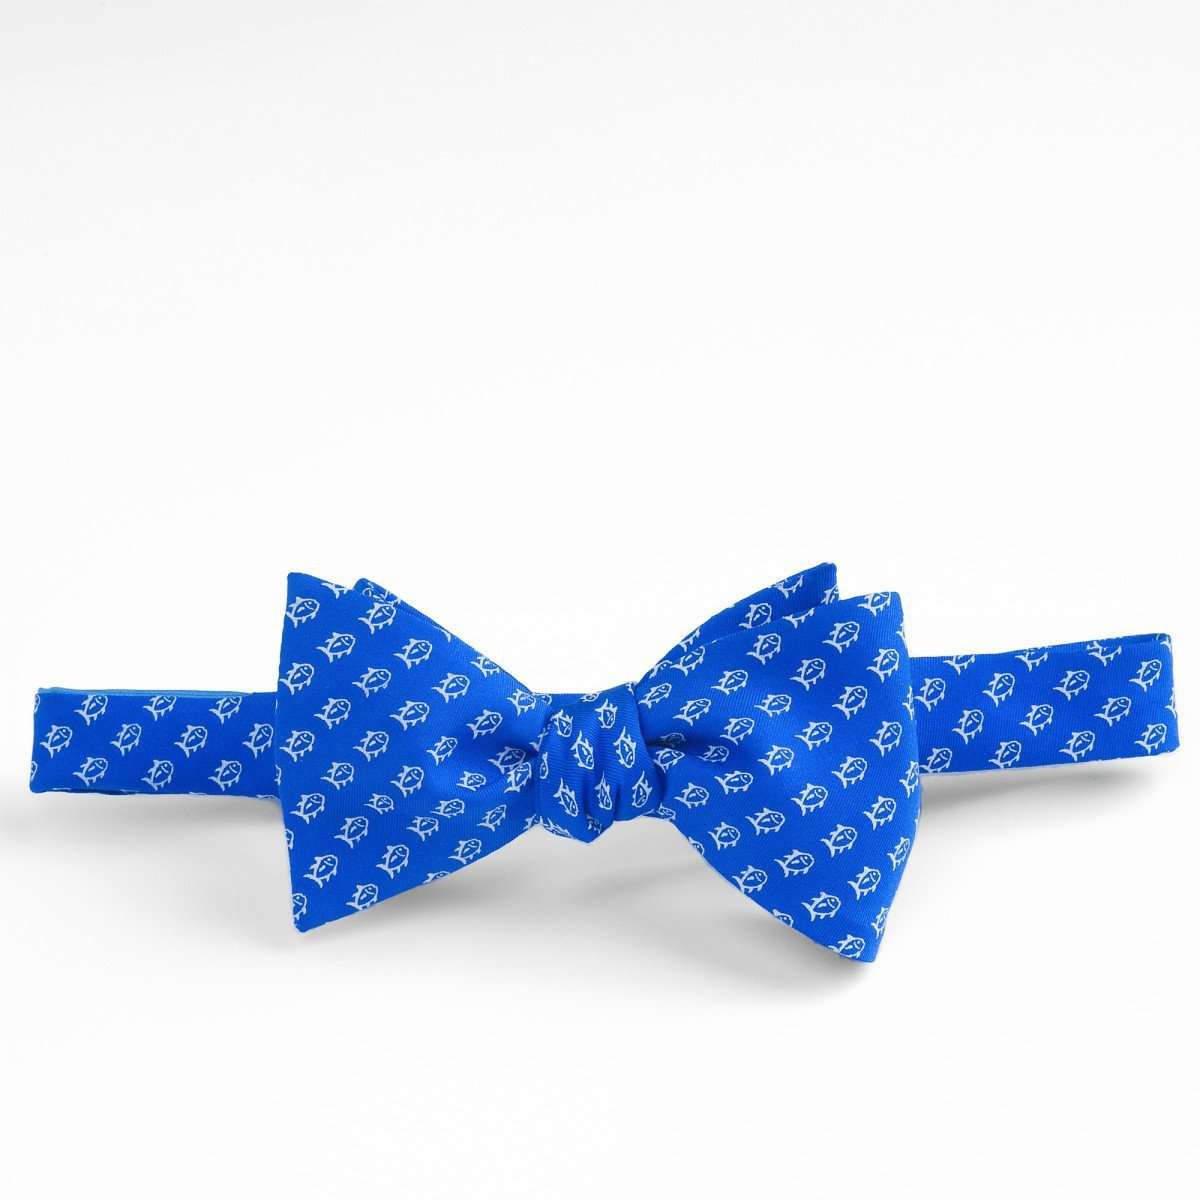 Team Colors Bow Tie in University Blue by Southern Tide - Country Club Prep